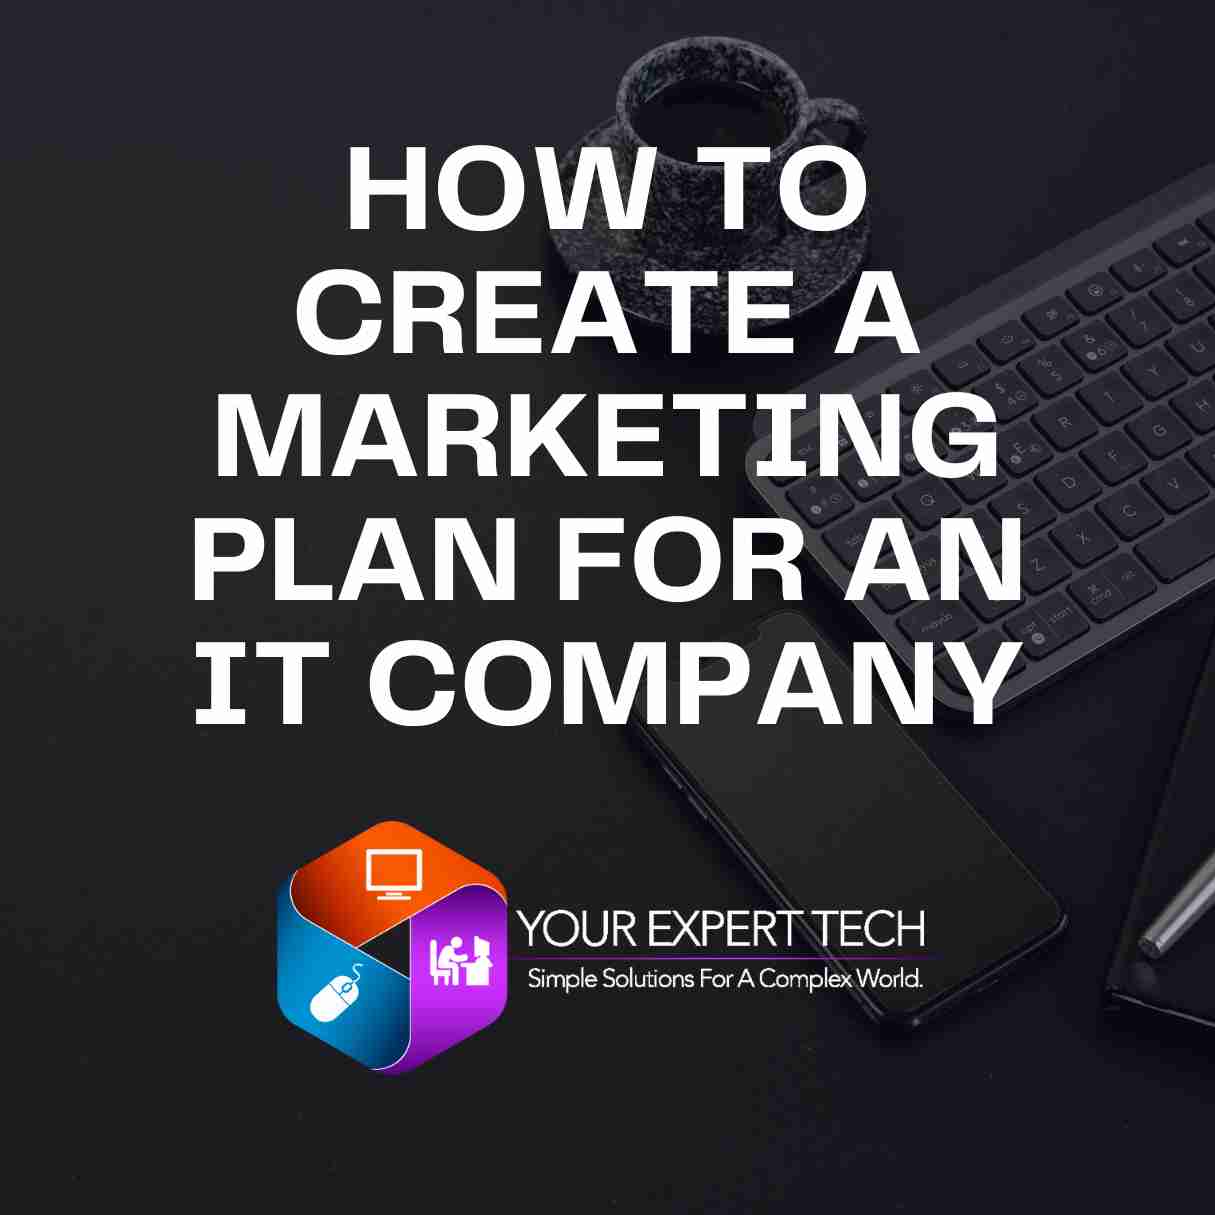 "Cover photo for 'How to Create a Marketing Plan for an IT Company' featuring a modern office setting with professionals strategizing around a digital marketing plan displayed on a large monitor."